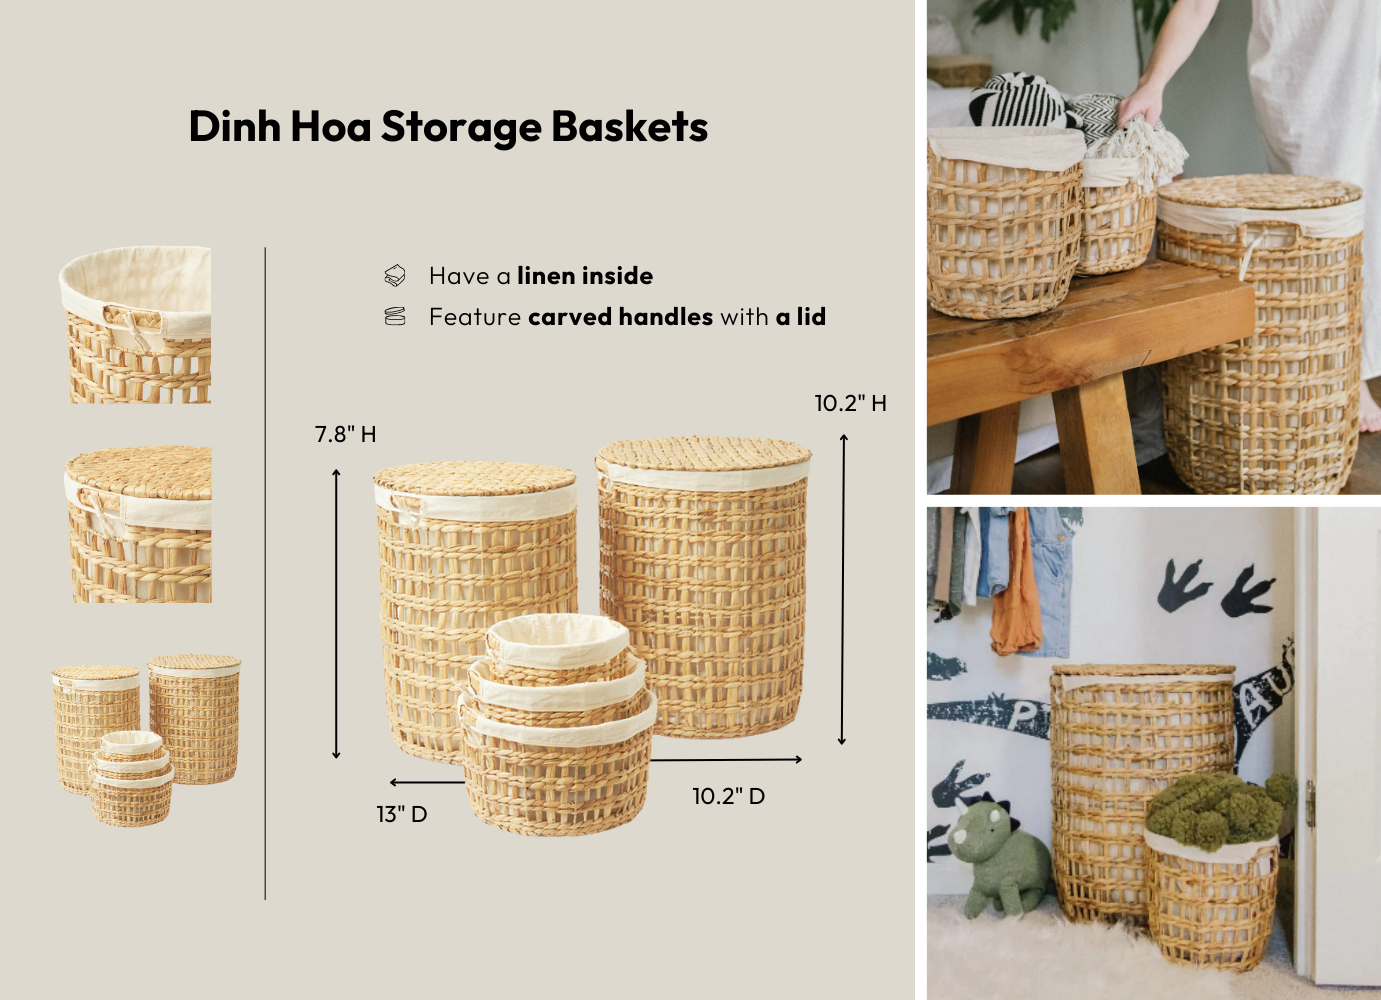 extra large organizers with Dinh Hoa basket